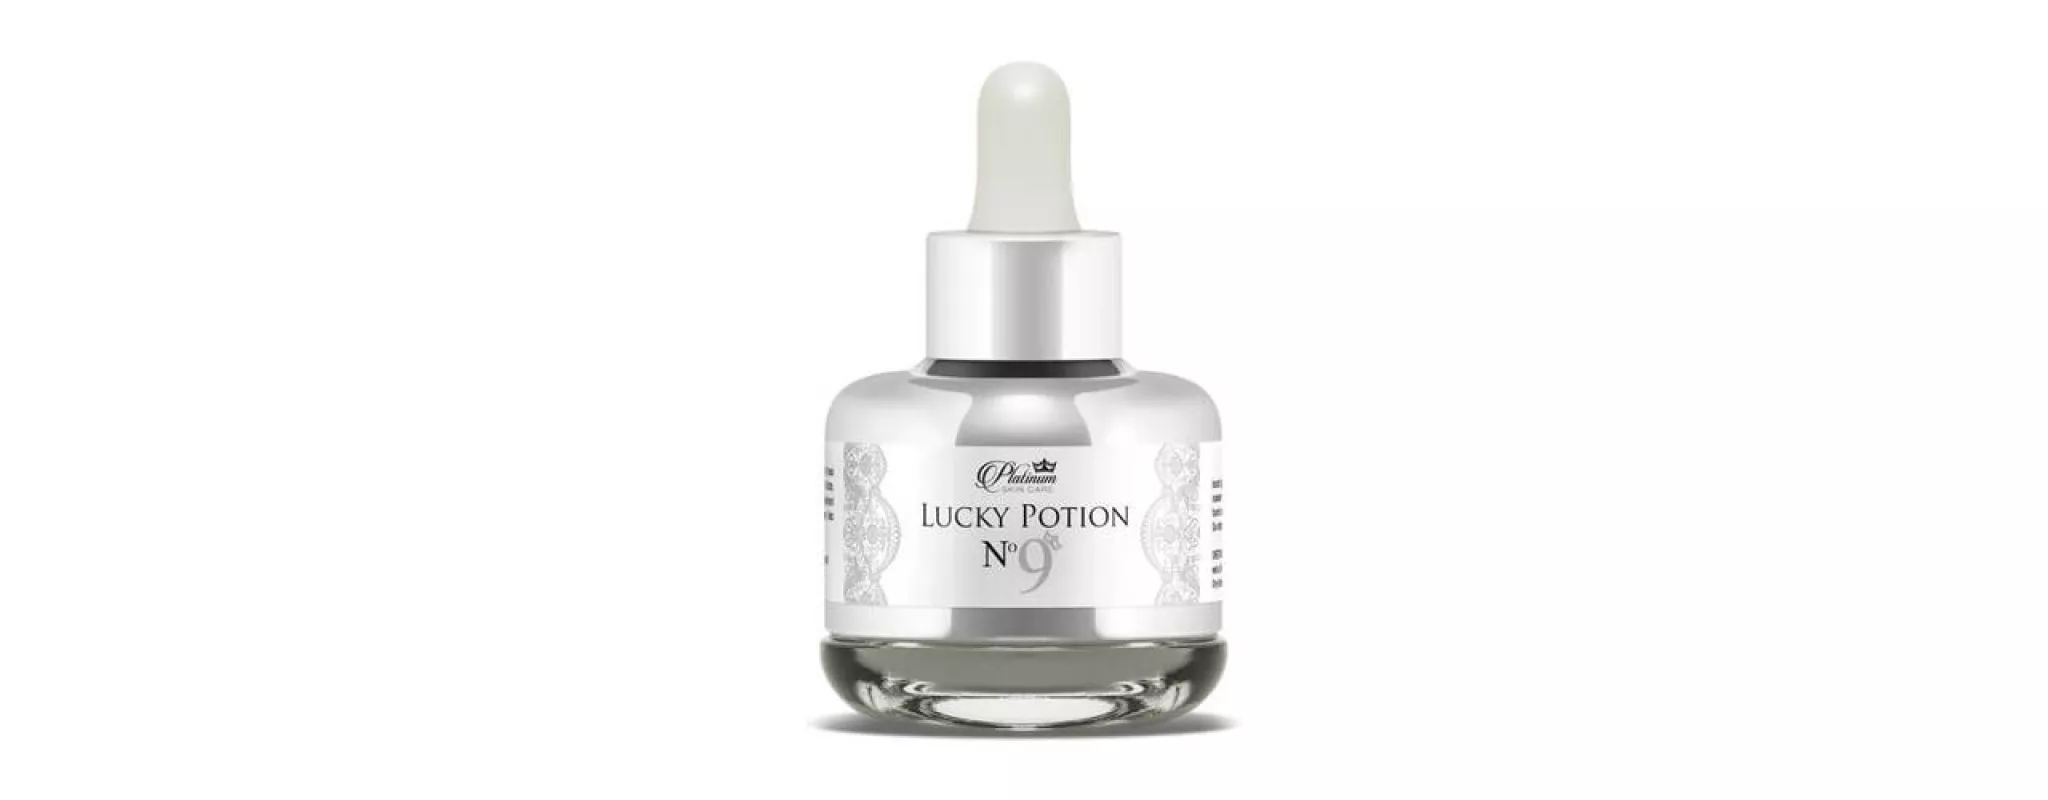 Lucky Potion No 9 - INSTANT TIGHTENING 30ml